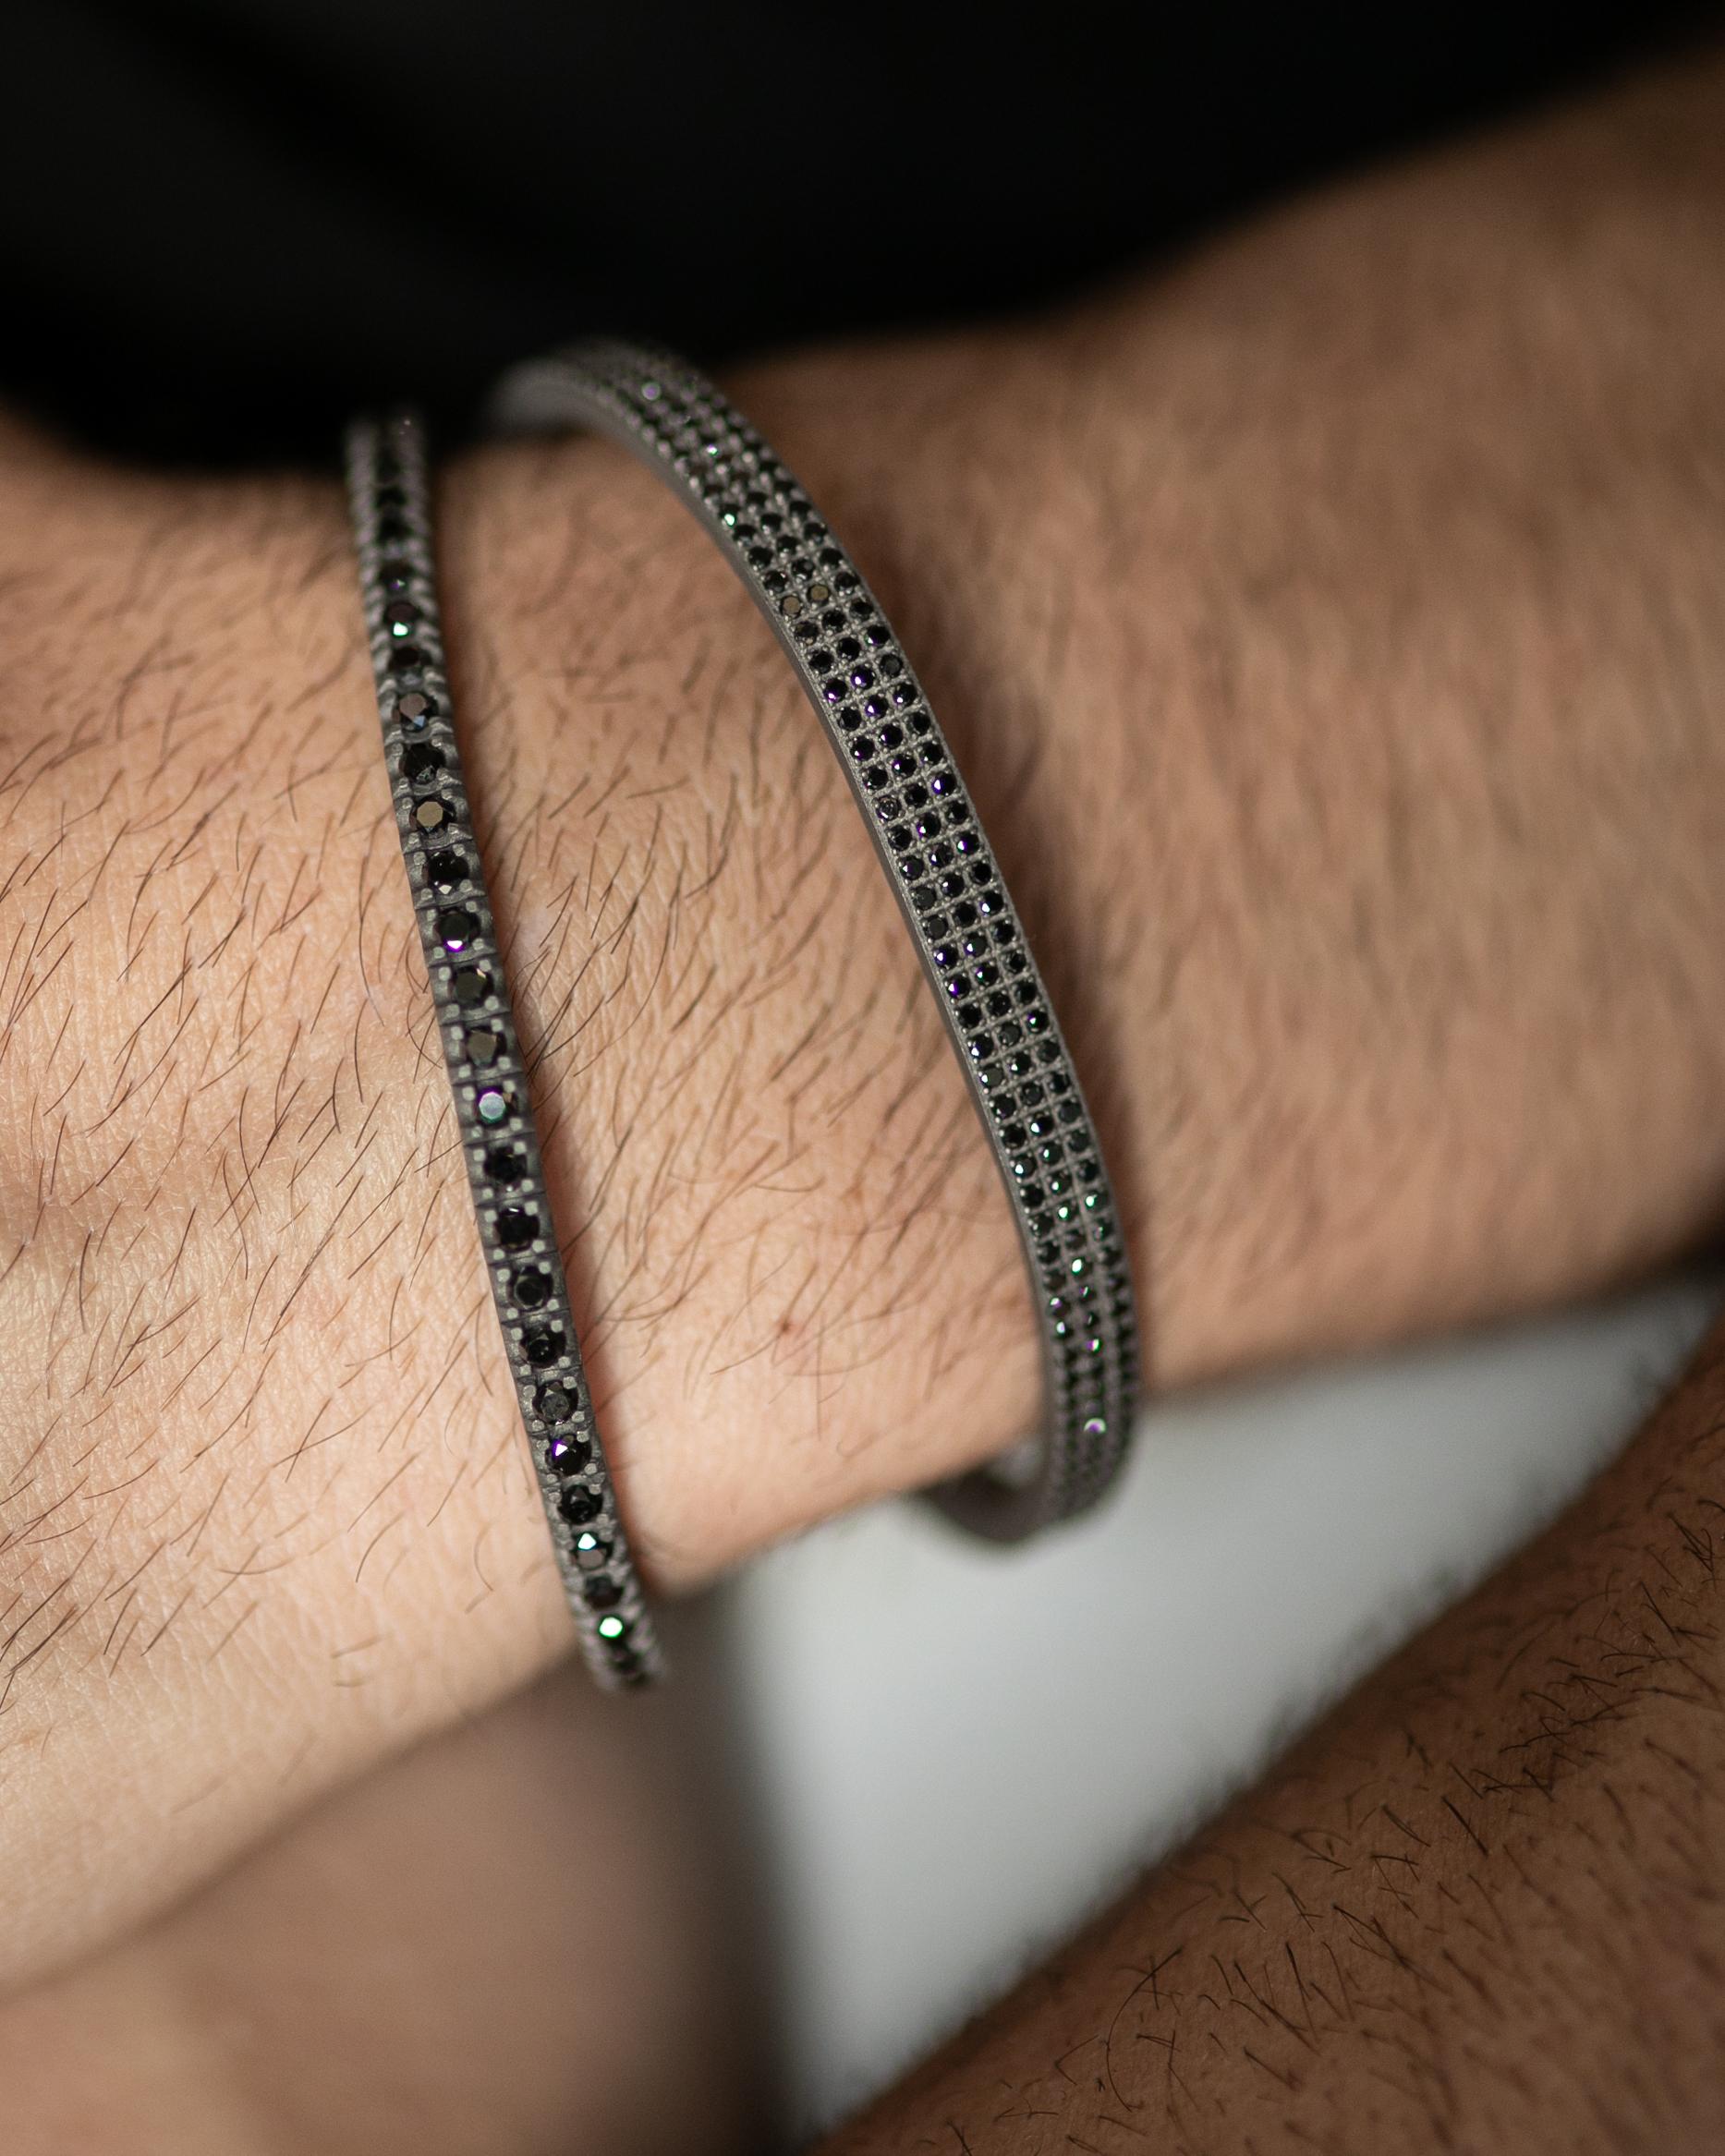 Titanium flexible bracelet is from our Men's collection. Bracelet is decorated by 58 beautiful natural black diamonds in total of 3.36 Carat and with 18K Rose Gold details. The diameter of the bracelet is 6.5 cm. Perfect for any day!

The men’s